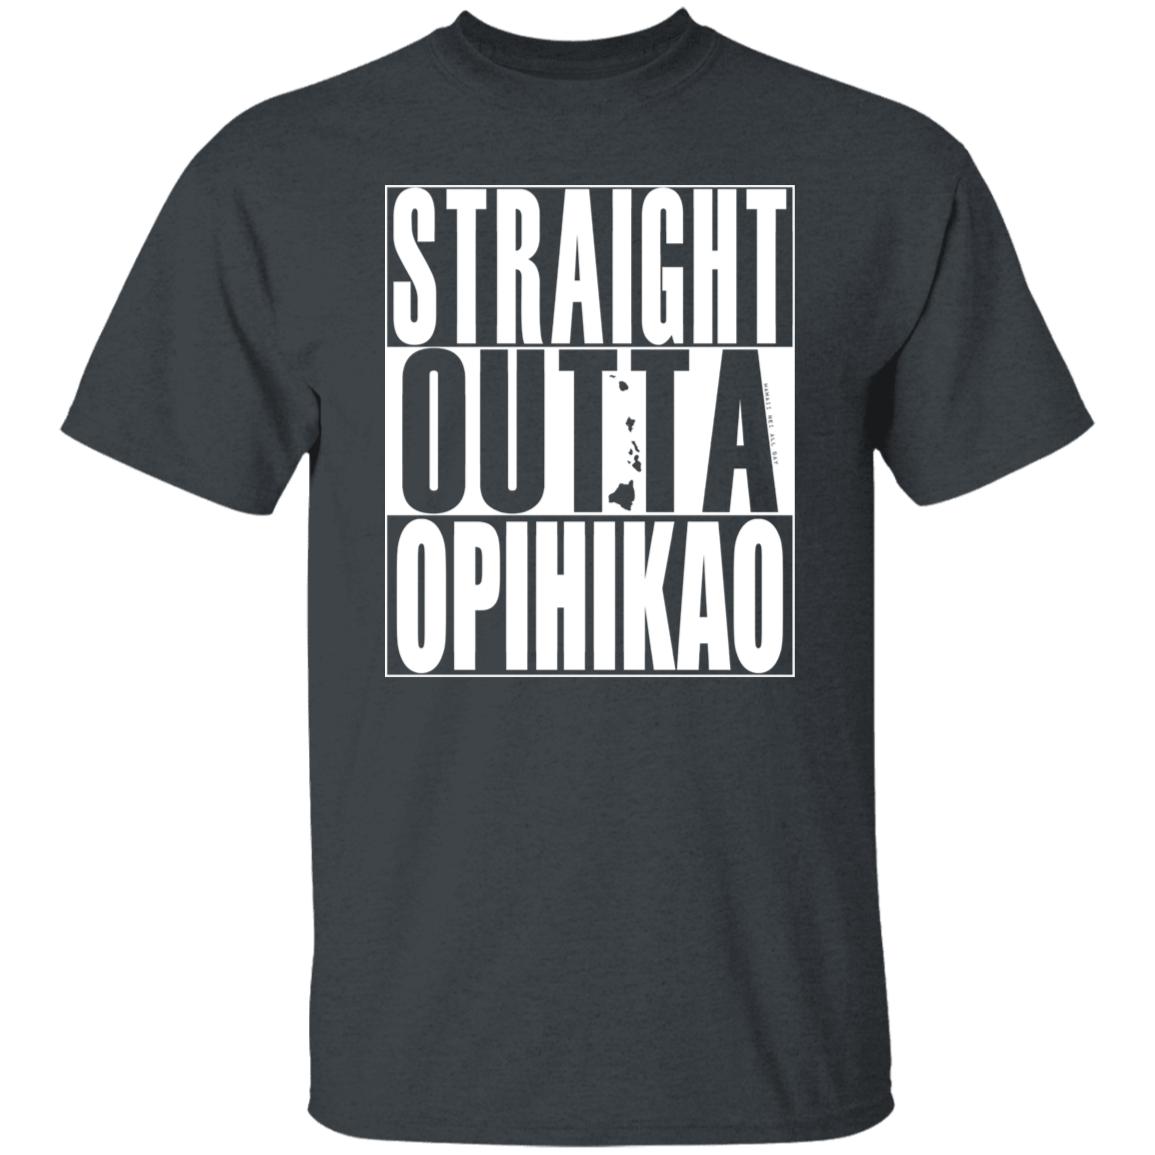 Straight Outta Opihikao (white ink) T-Shirt